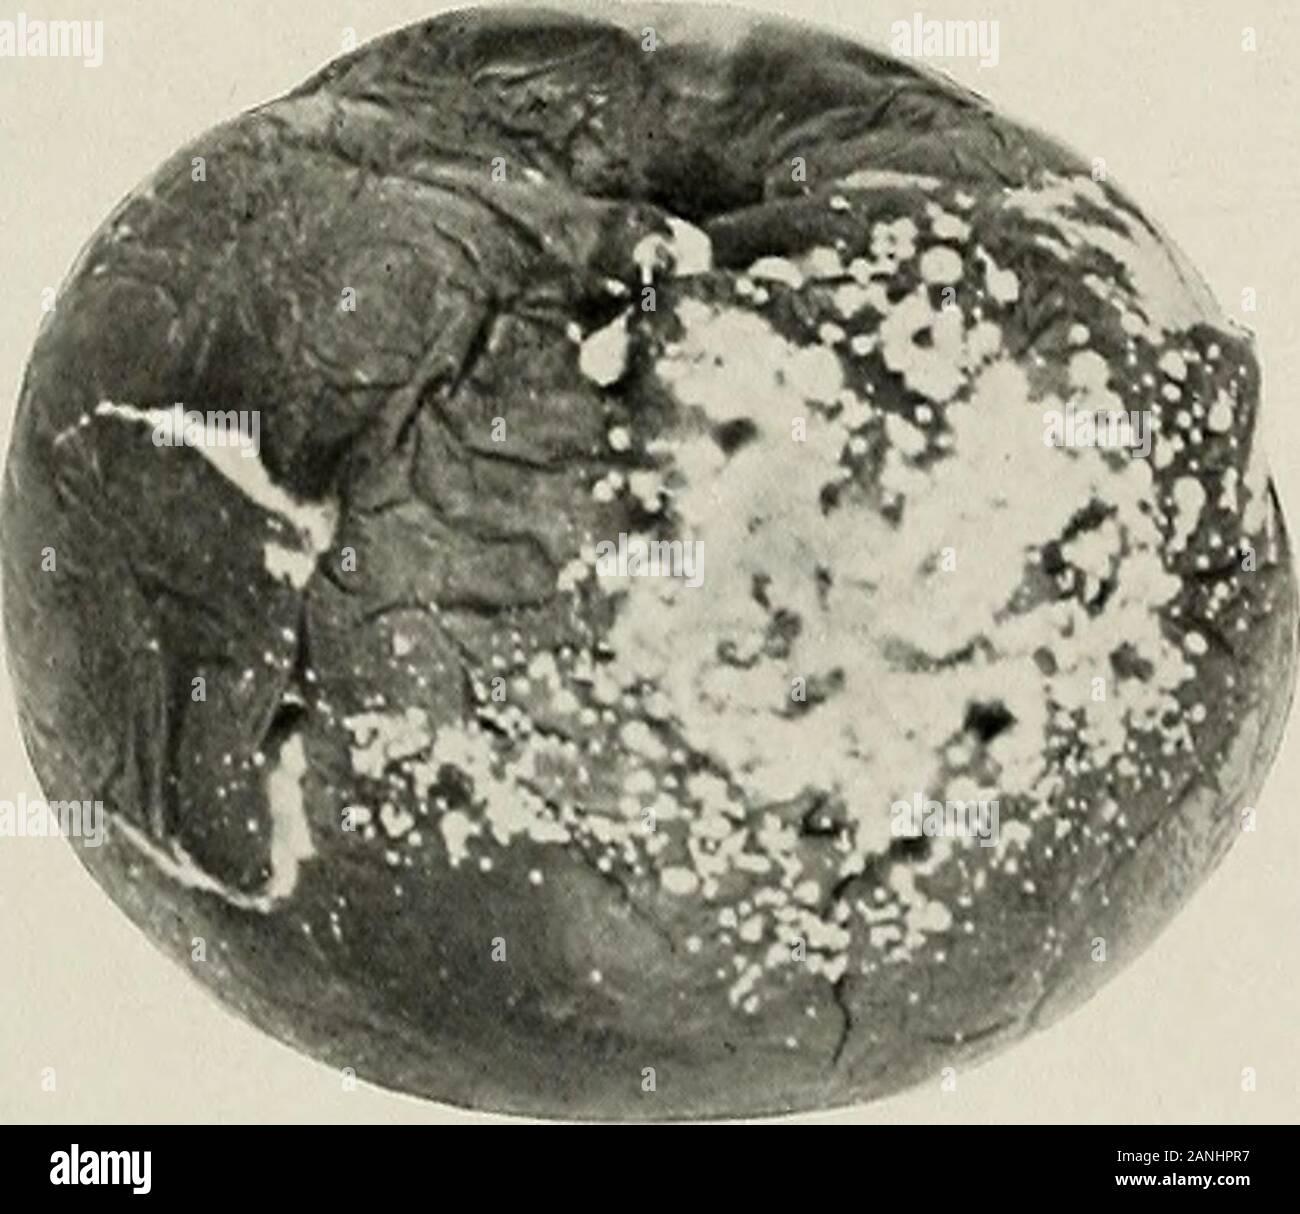 Annual report of the Maine Agricultural Experiment Station . Fig. 255. Phoma decay.. Fig. 256. Fusarium decay. Stock Photo